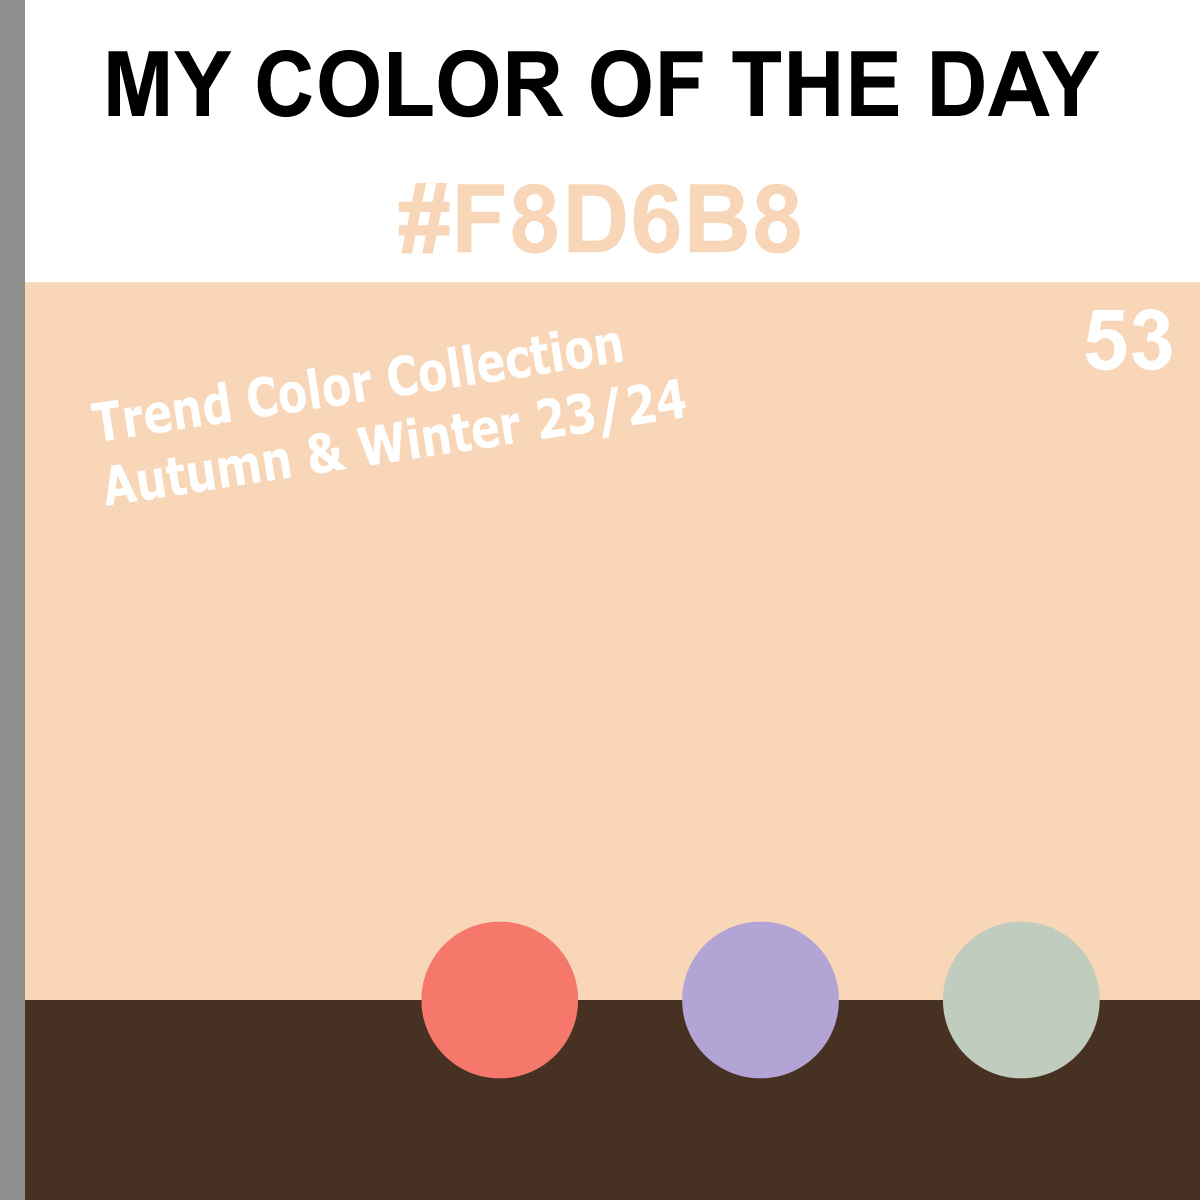 My Color Of The Day: #f8d6b8 
Embrace a touch of softness and femininity with this delicate shade of peach. Additional Colors HEX: 473122 F5786B B2A4D5 C0CCBE #coloroftheday #colorpalette #designforsmiles  #colorscheme #colorschemes #colorinspiration #color #design #peach #blush